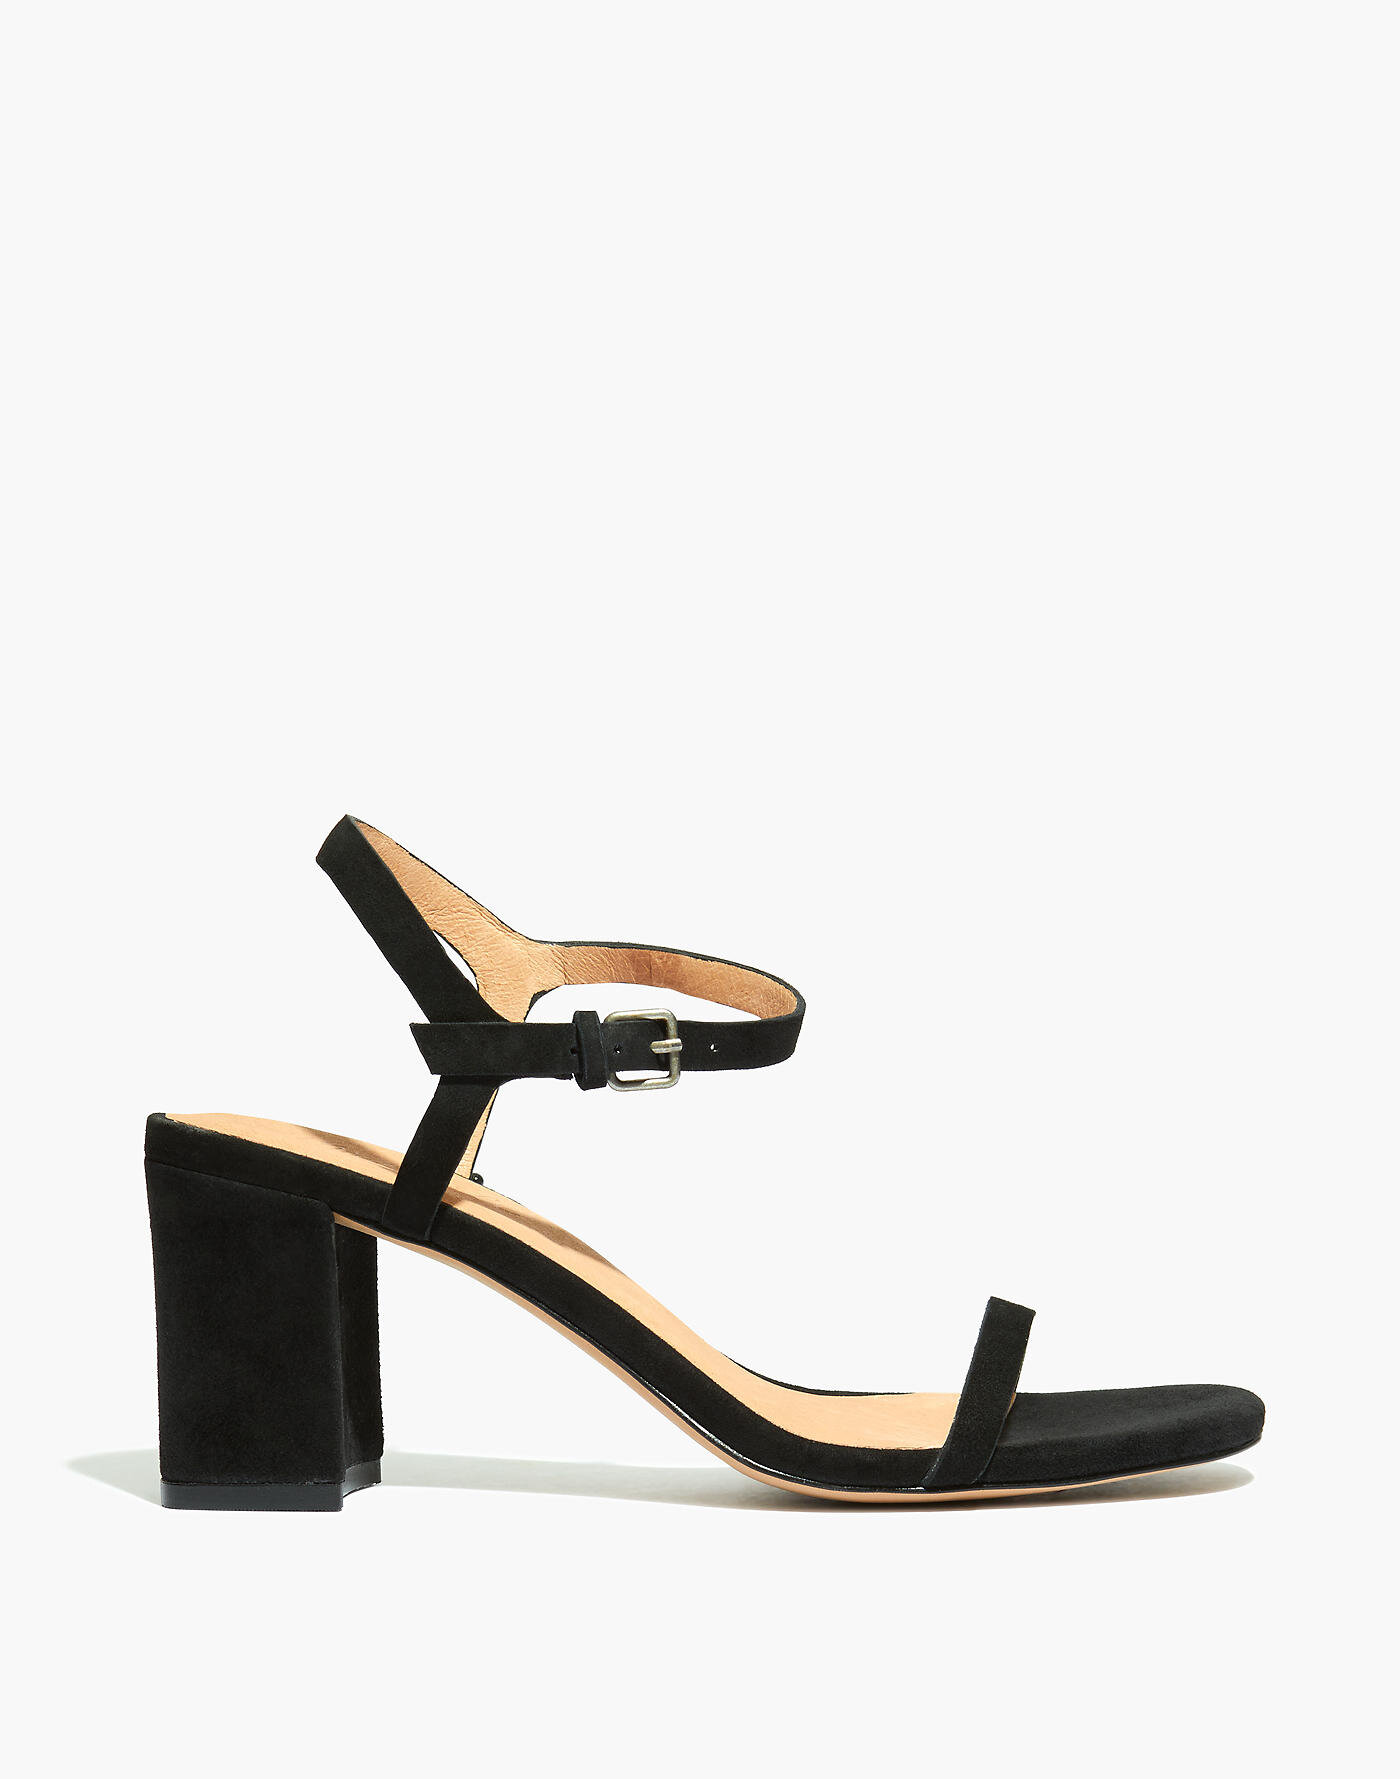 The Hollie Ankle-Strap Sandal in Suede.jpg